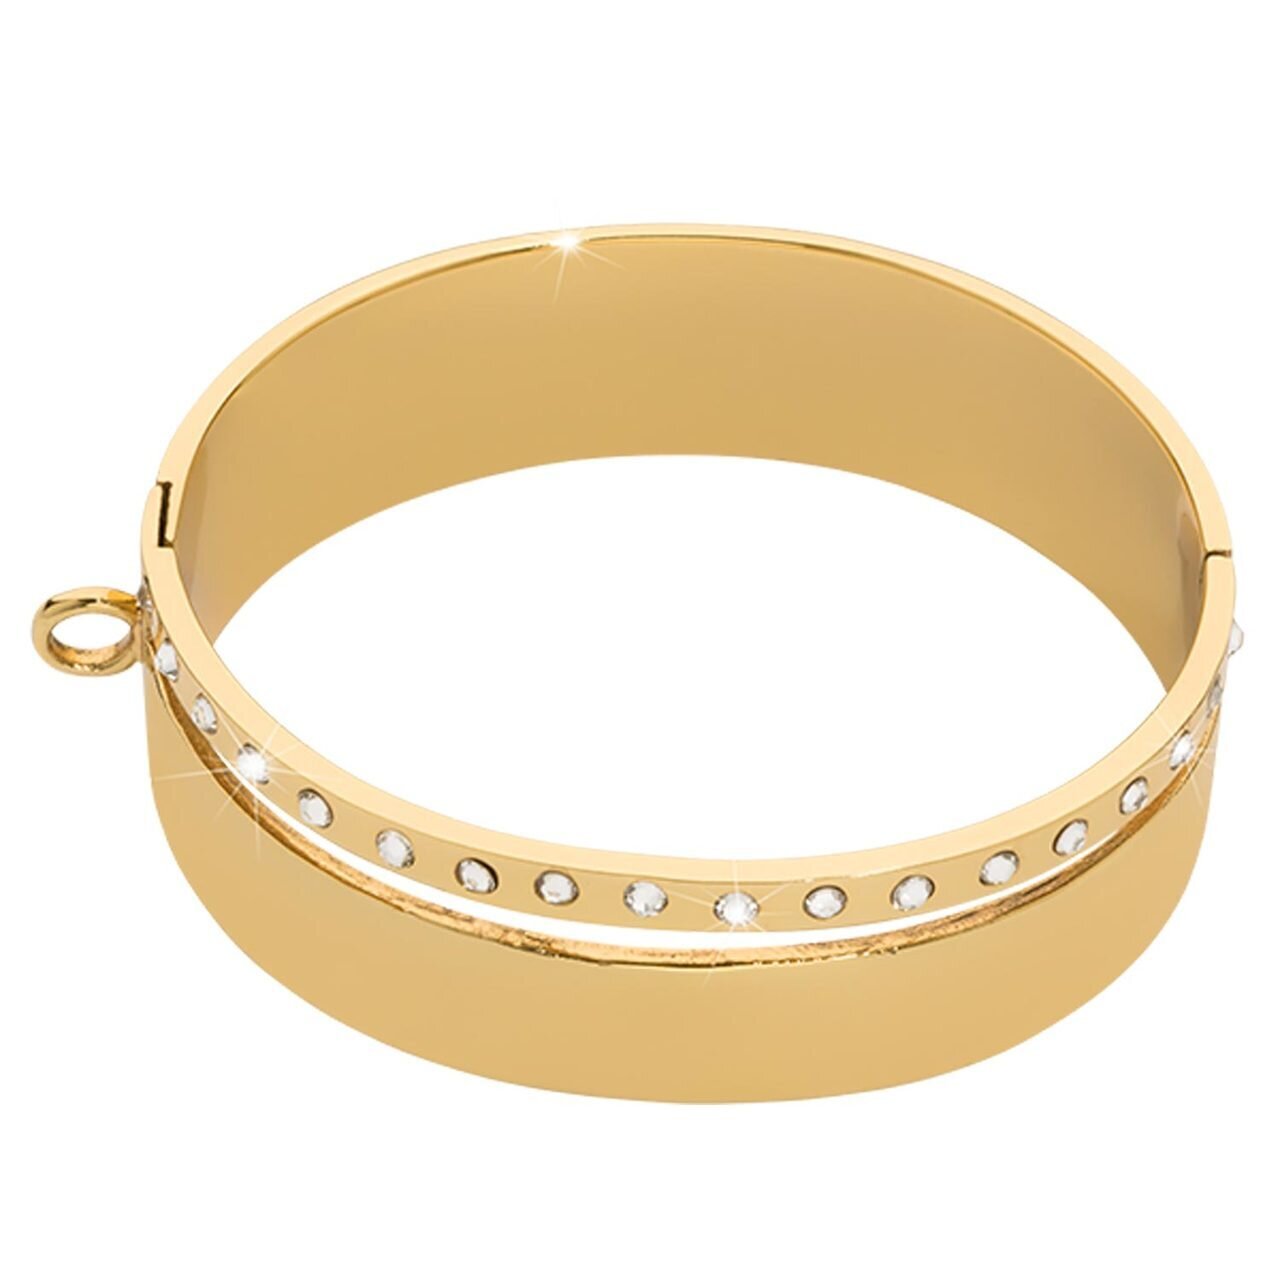 Nikki Lissoni Large Double Bangle of 2cm with Swarovski Crystals 1 Loop To Attach A Charm Gold-plated 21cm B1147G21